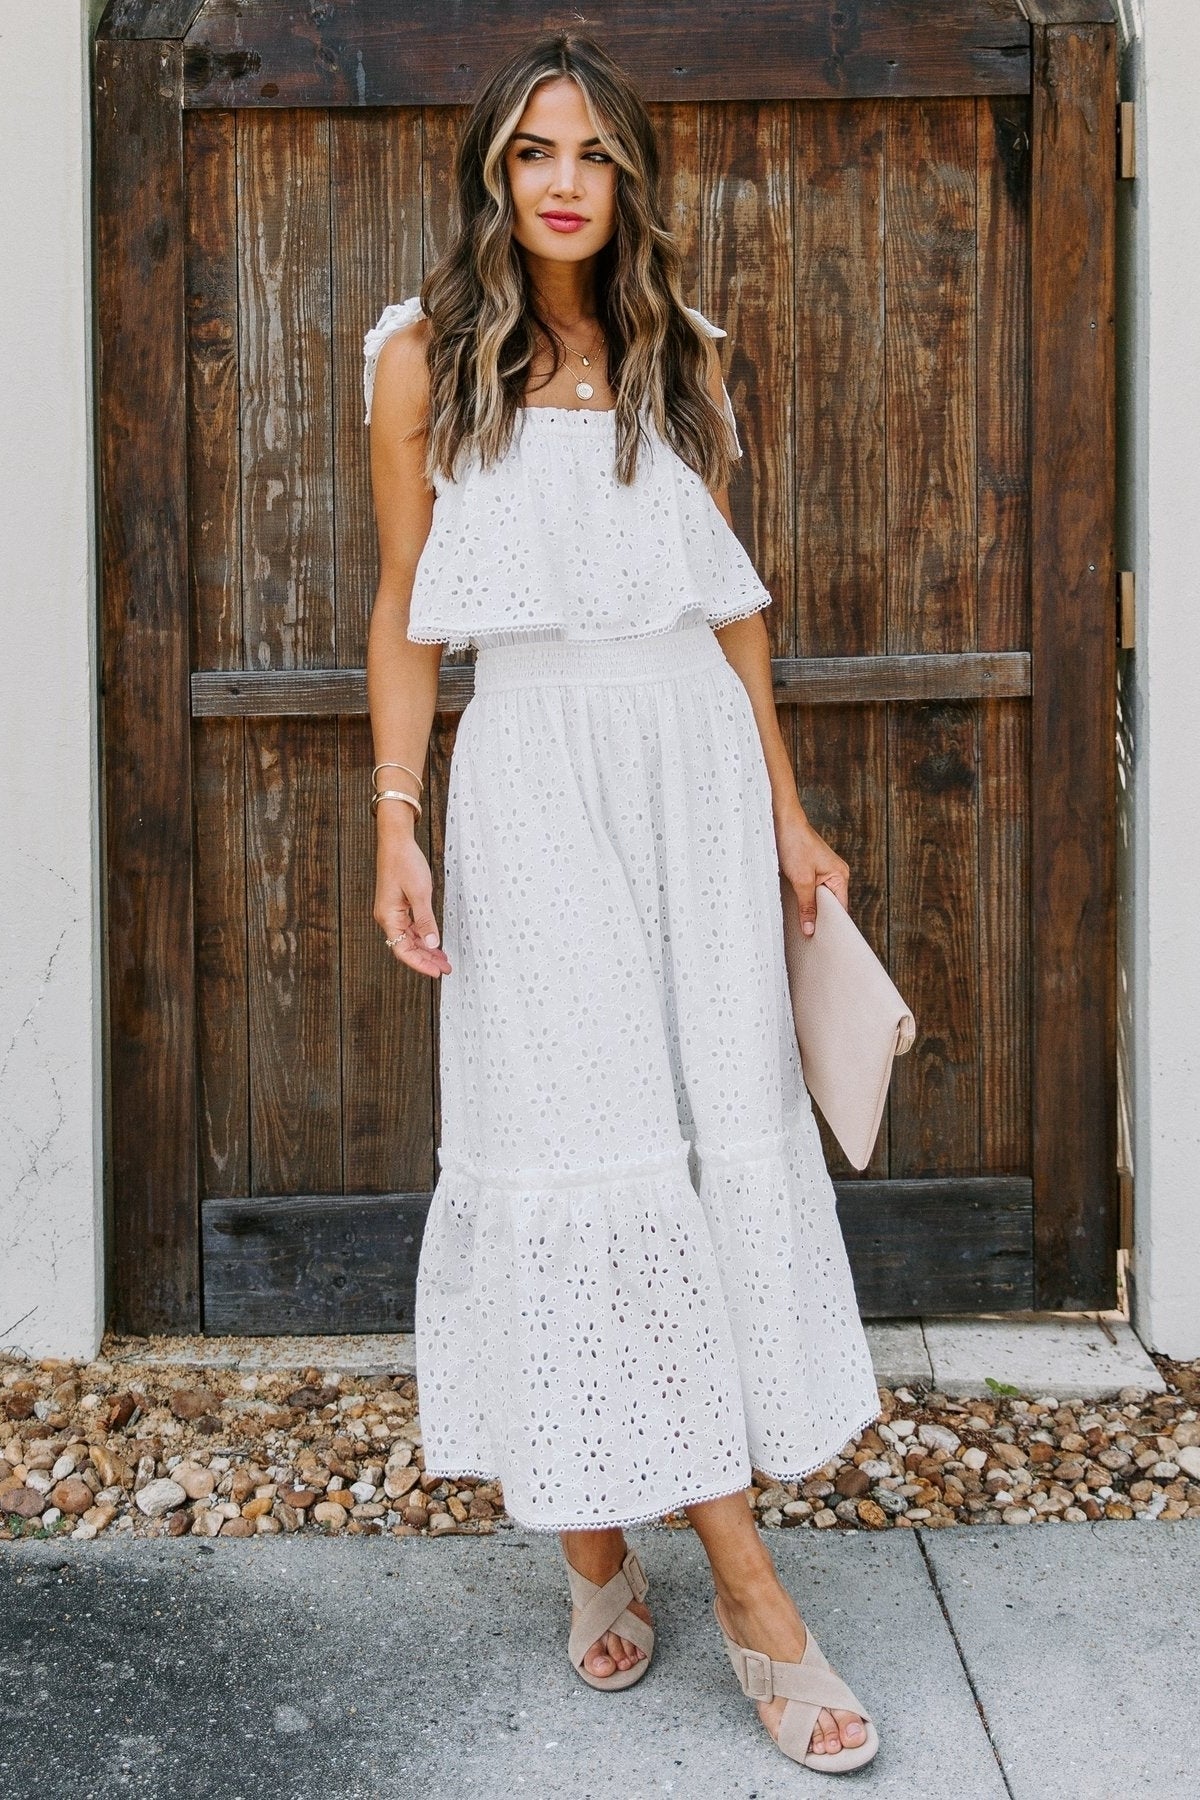 Boho Cocktail & Formal Dresses  Bohemian, Country & Vintage Style